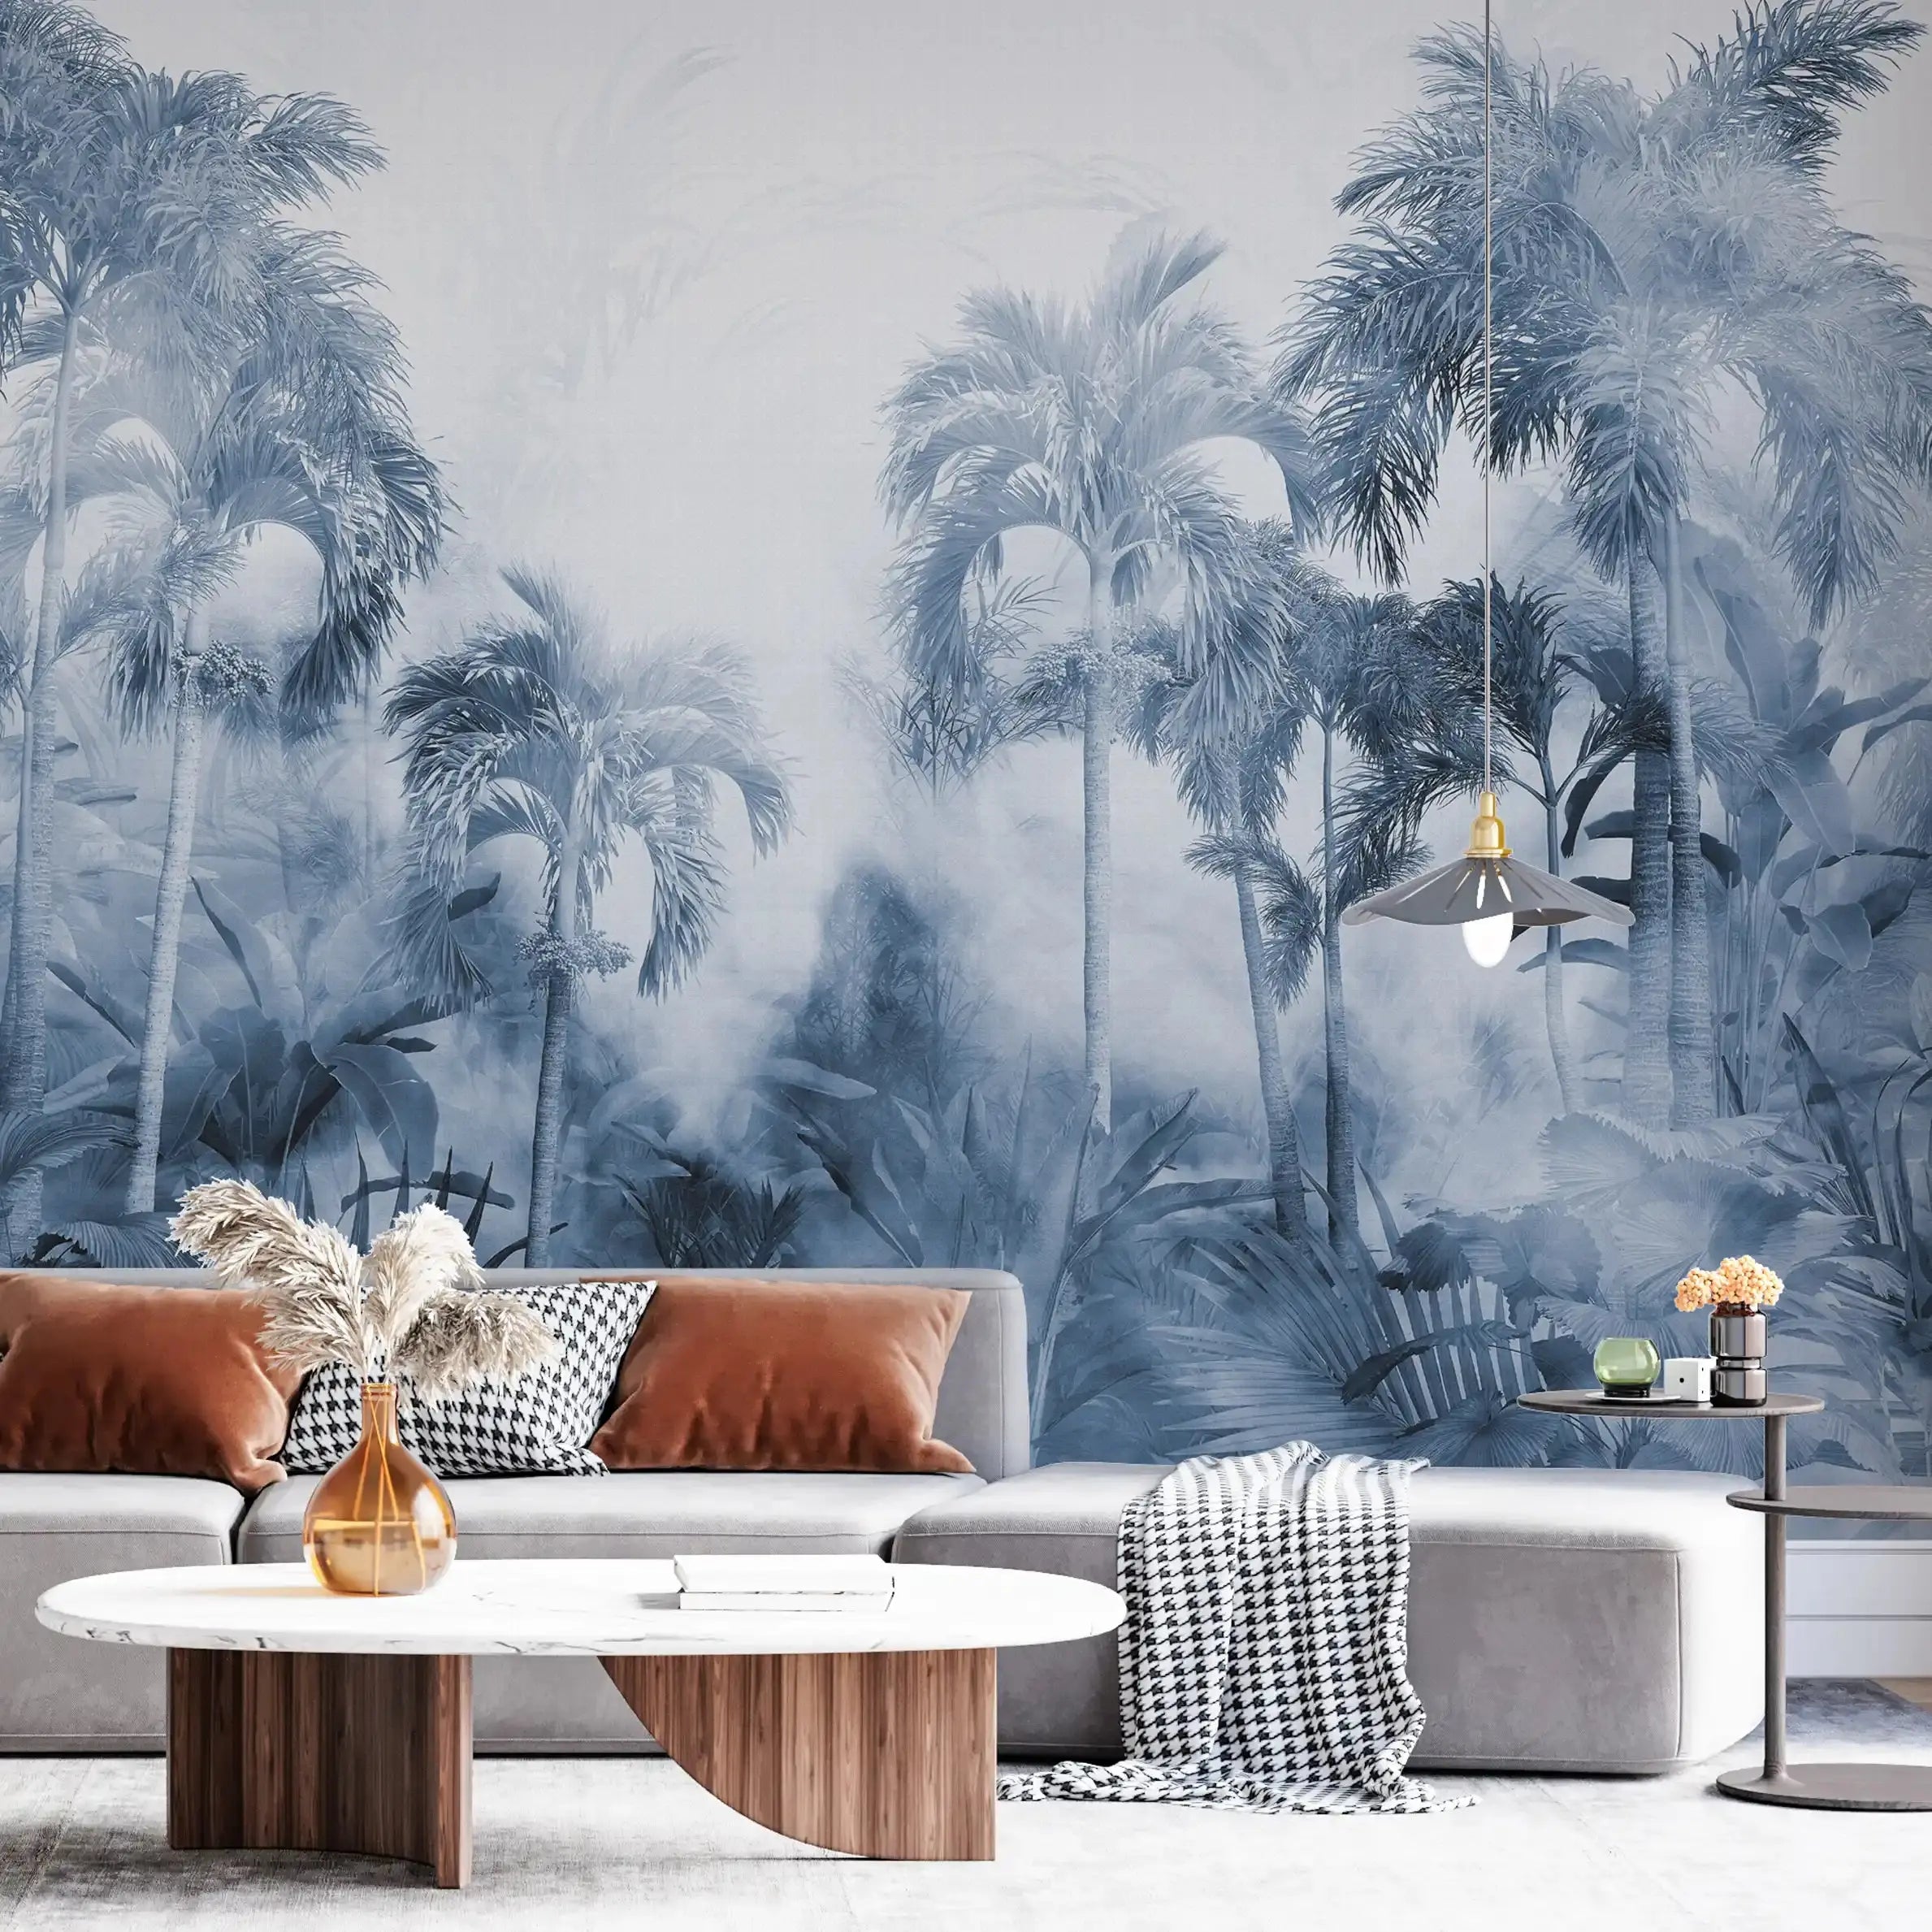 3029-D / Temporary Wallpaper: Tropical Jungle in Foggy Watercolor, Peel and Stick for Renters and DIY Deco - Artevella